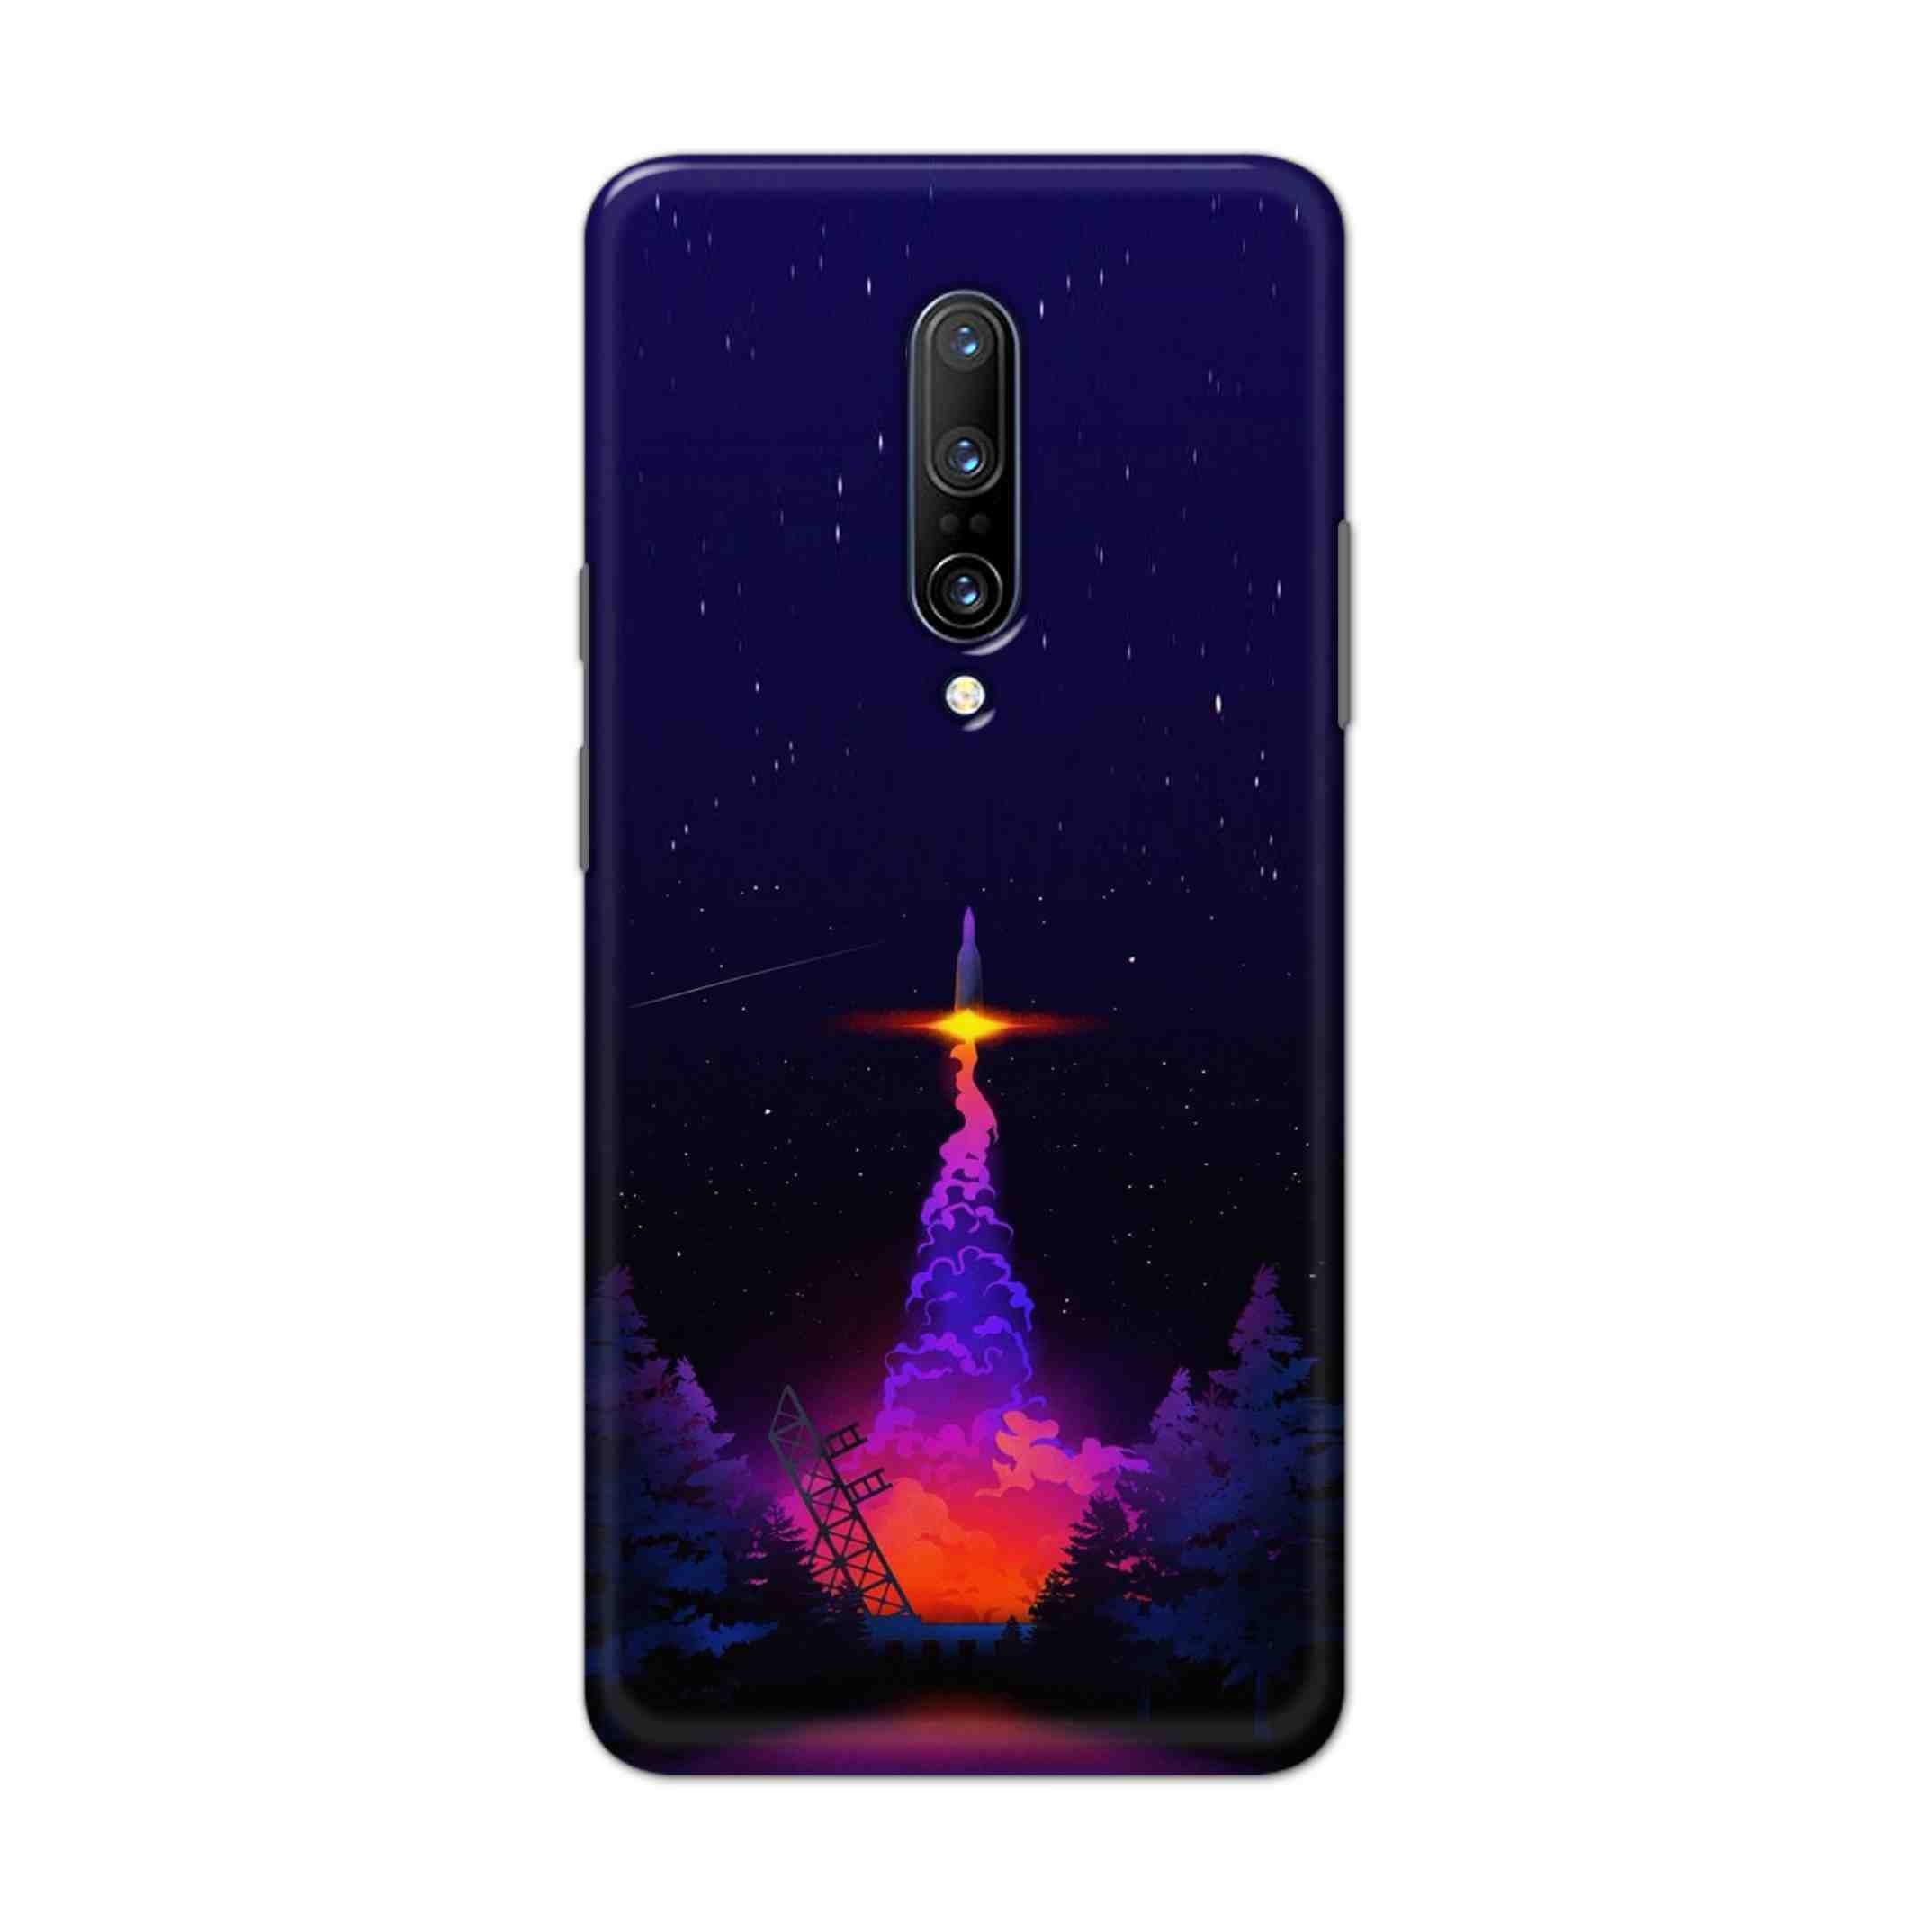 Buy Rocket Launching Hard Back Mobile Phone Case Cover For OnePlus 7 Pro Online